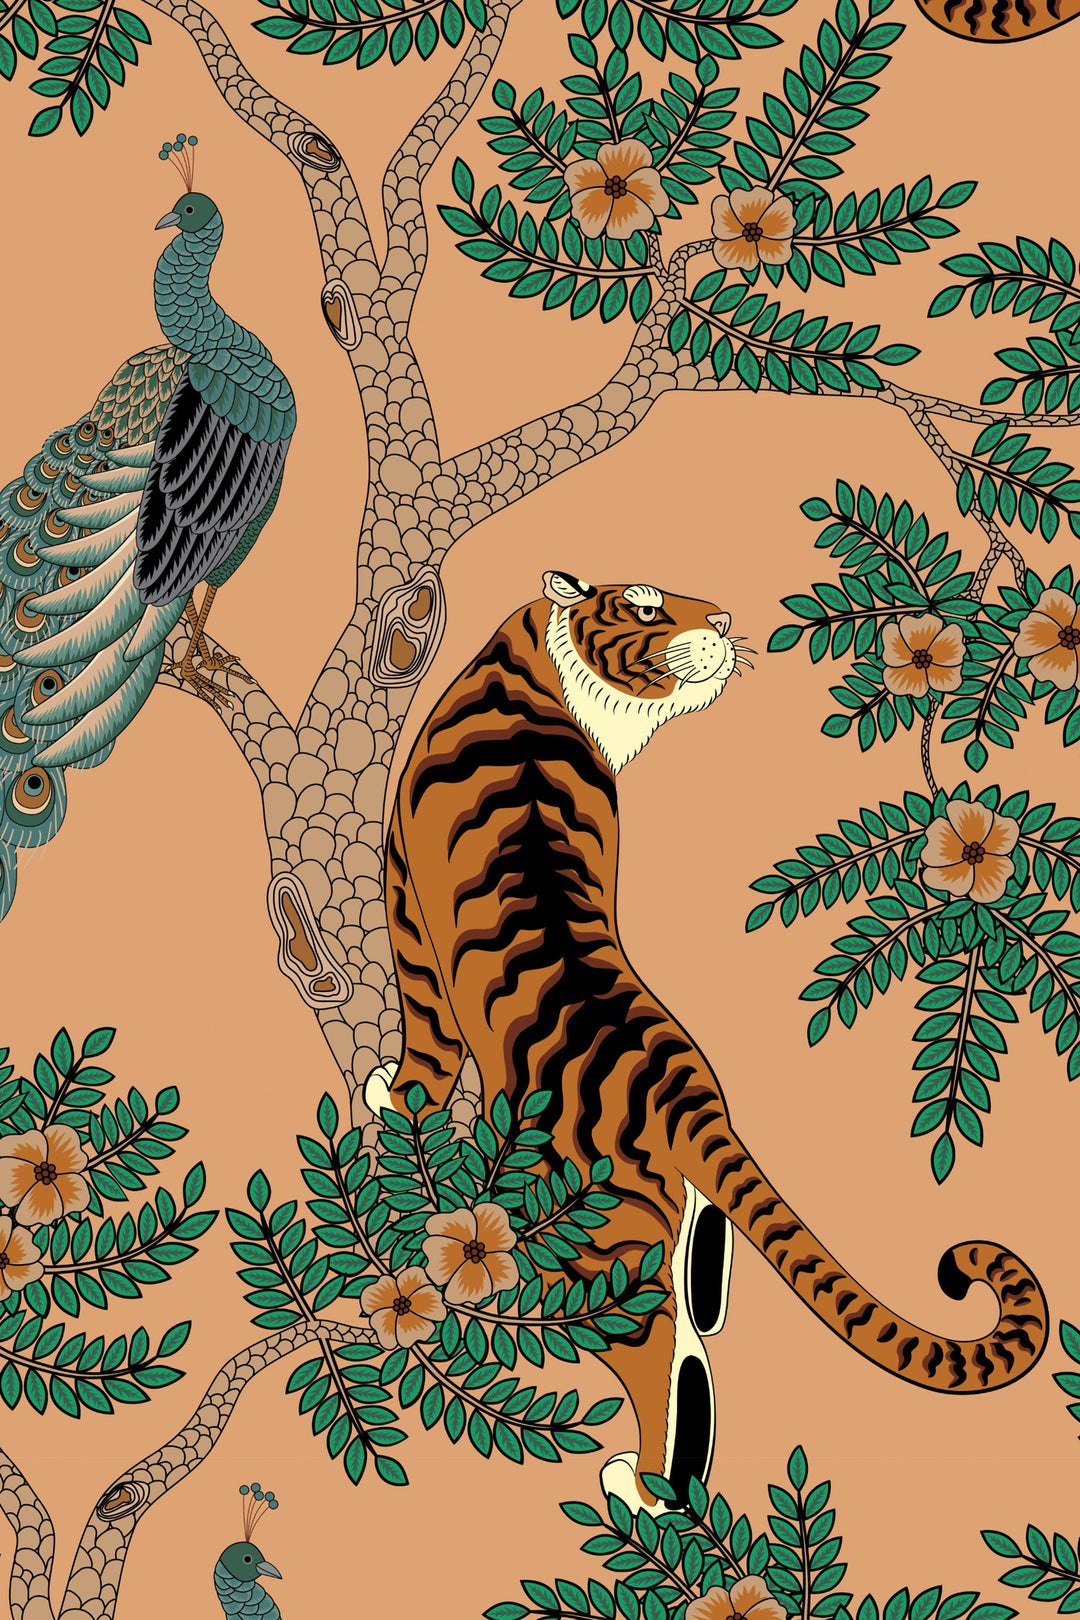 Animals design wallpaper 3183: tigers with peacoks and trees